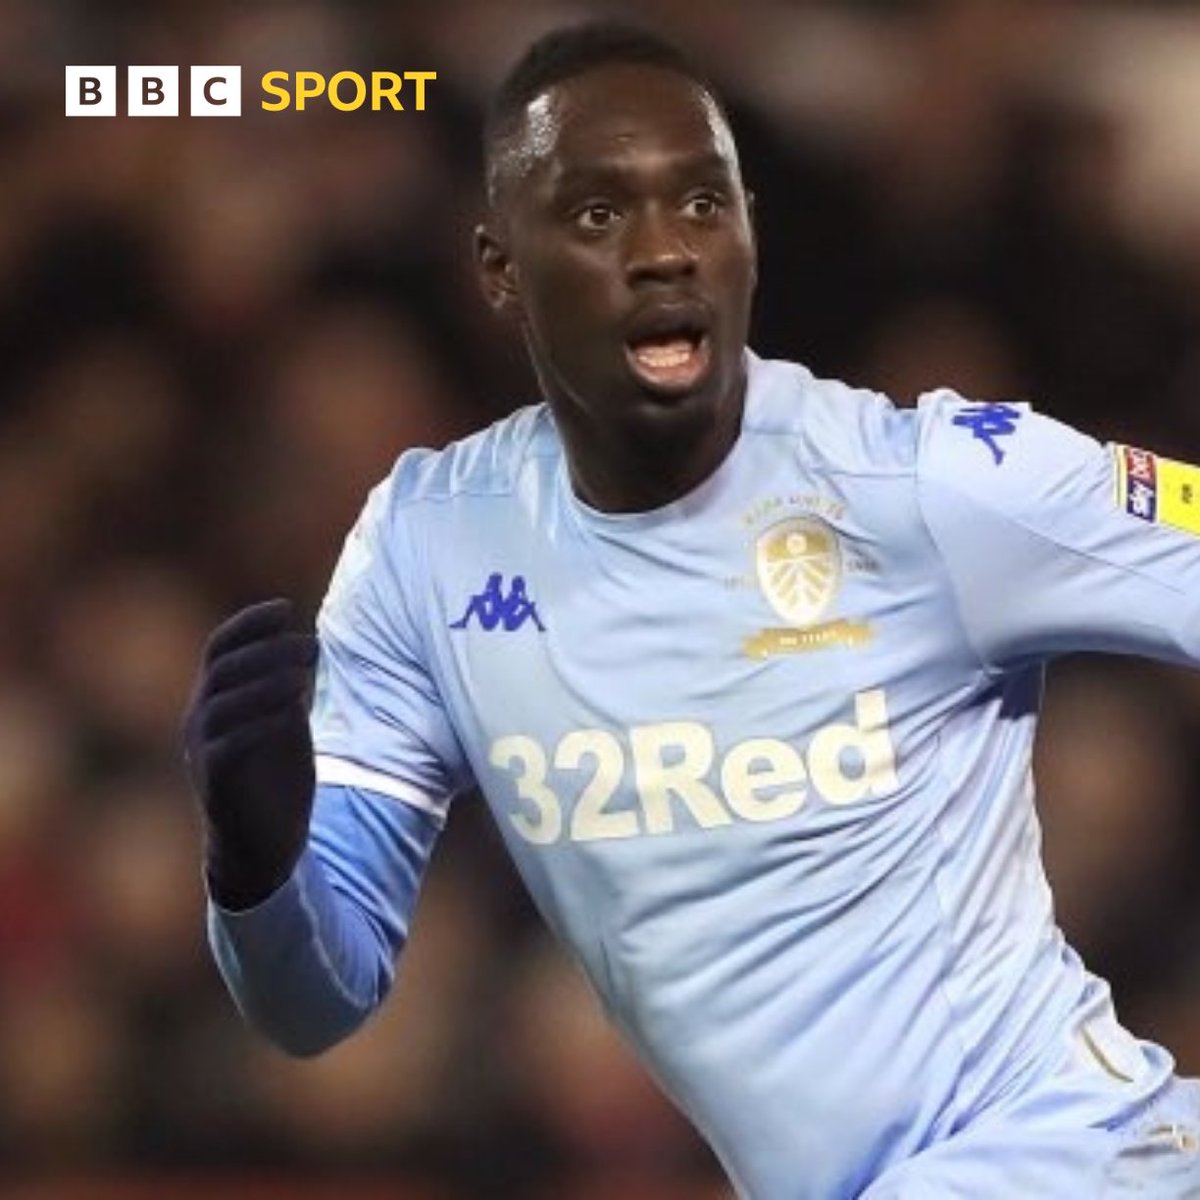 BREAKING: CAS rule against Leeds United RB Leipzig’s claim to be paid a transfer fee for Jean-Kévin Augustin is confirmed by Court of Arbitration. Club says it 'will now review carefully all of its legal options with a view to an immediate appeal.' #lufc #BBCFootball